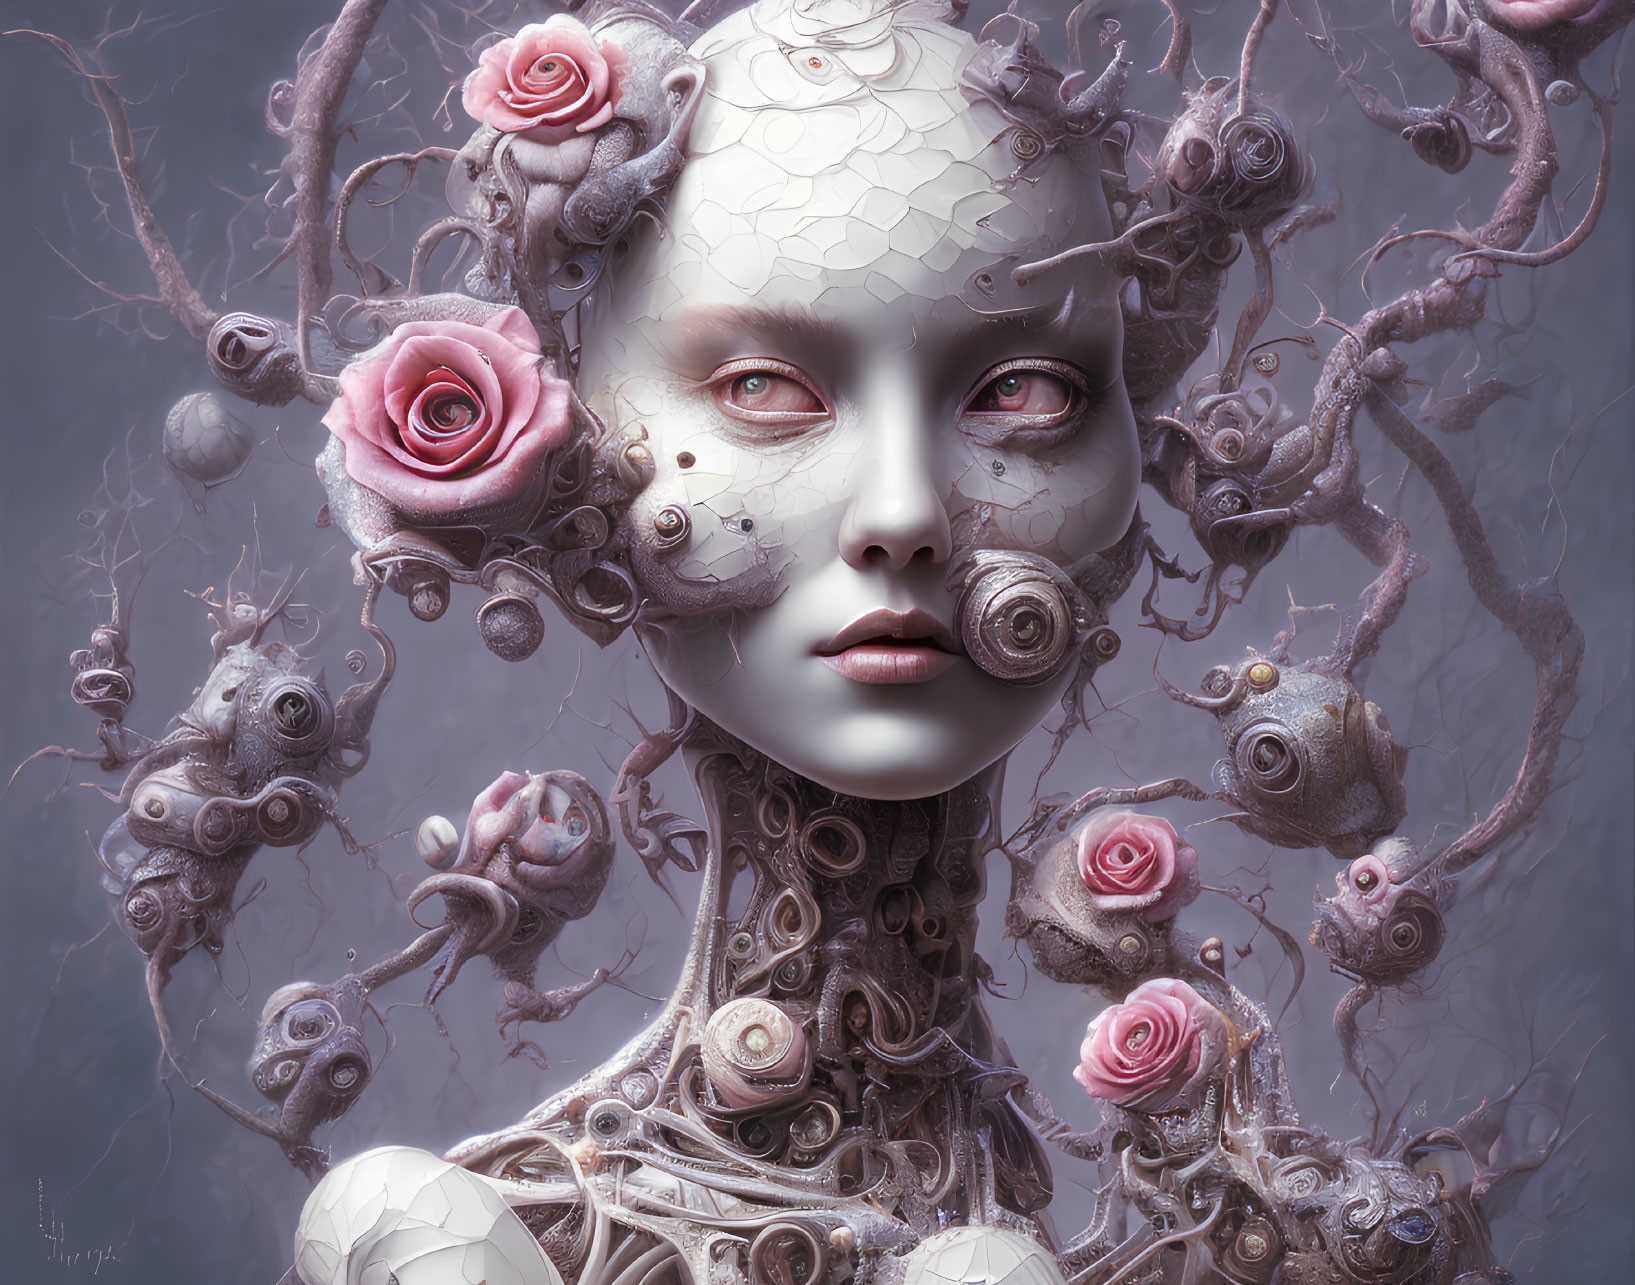 Surreal female figure with cracked porcelain face, mechanical tendrils, and pink roses.